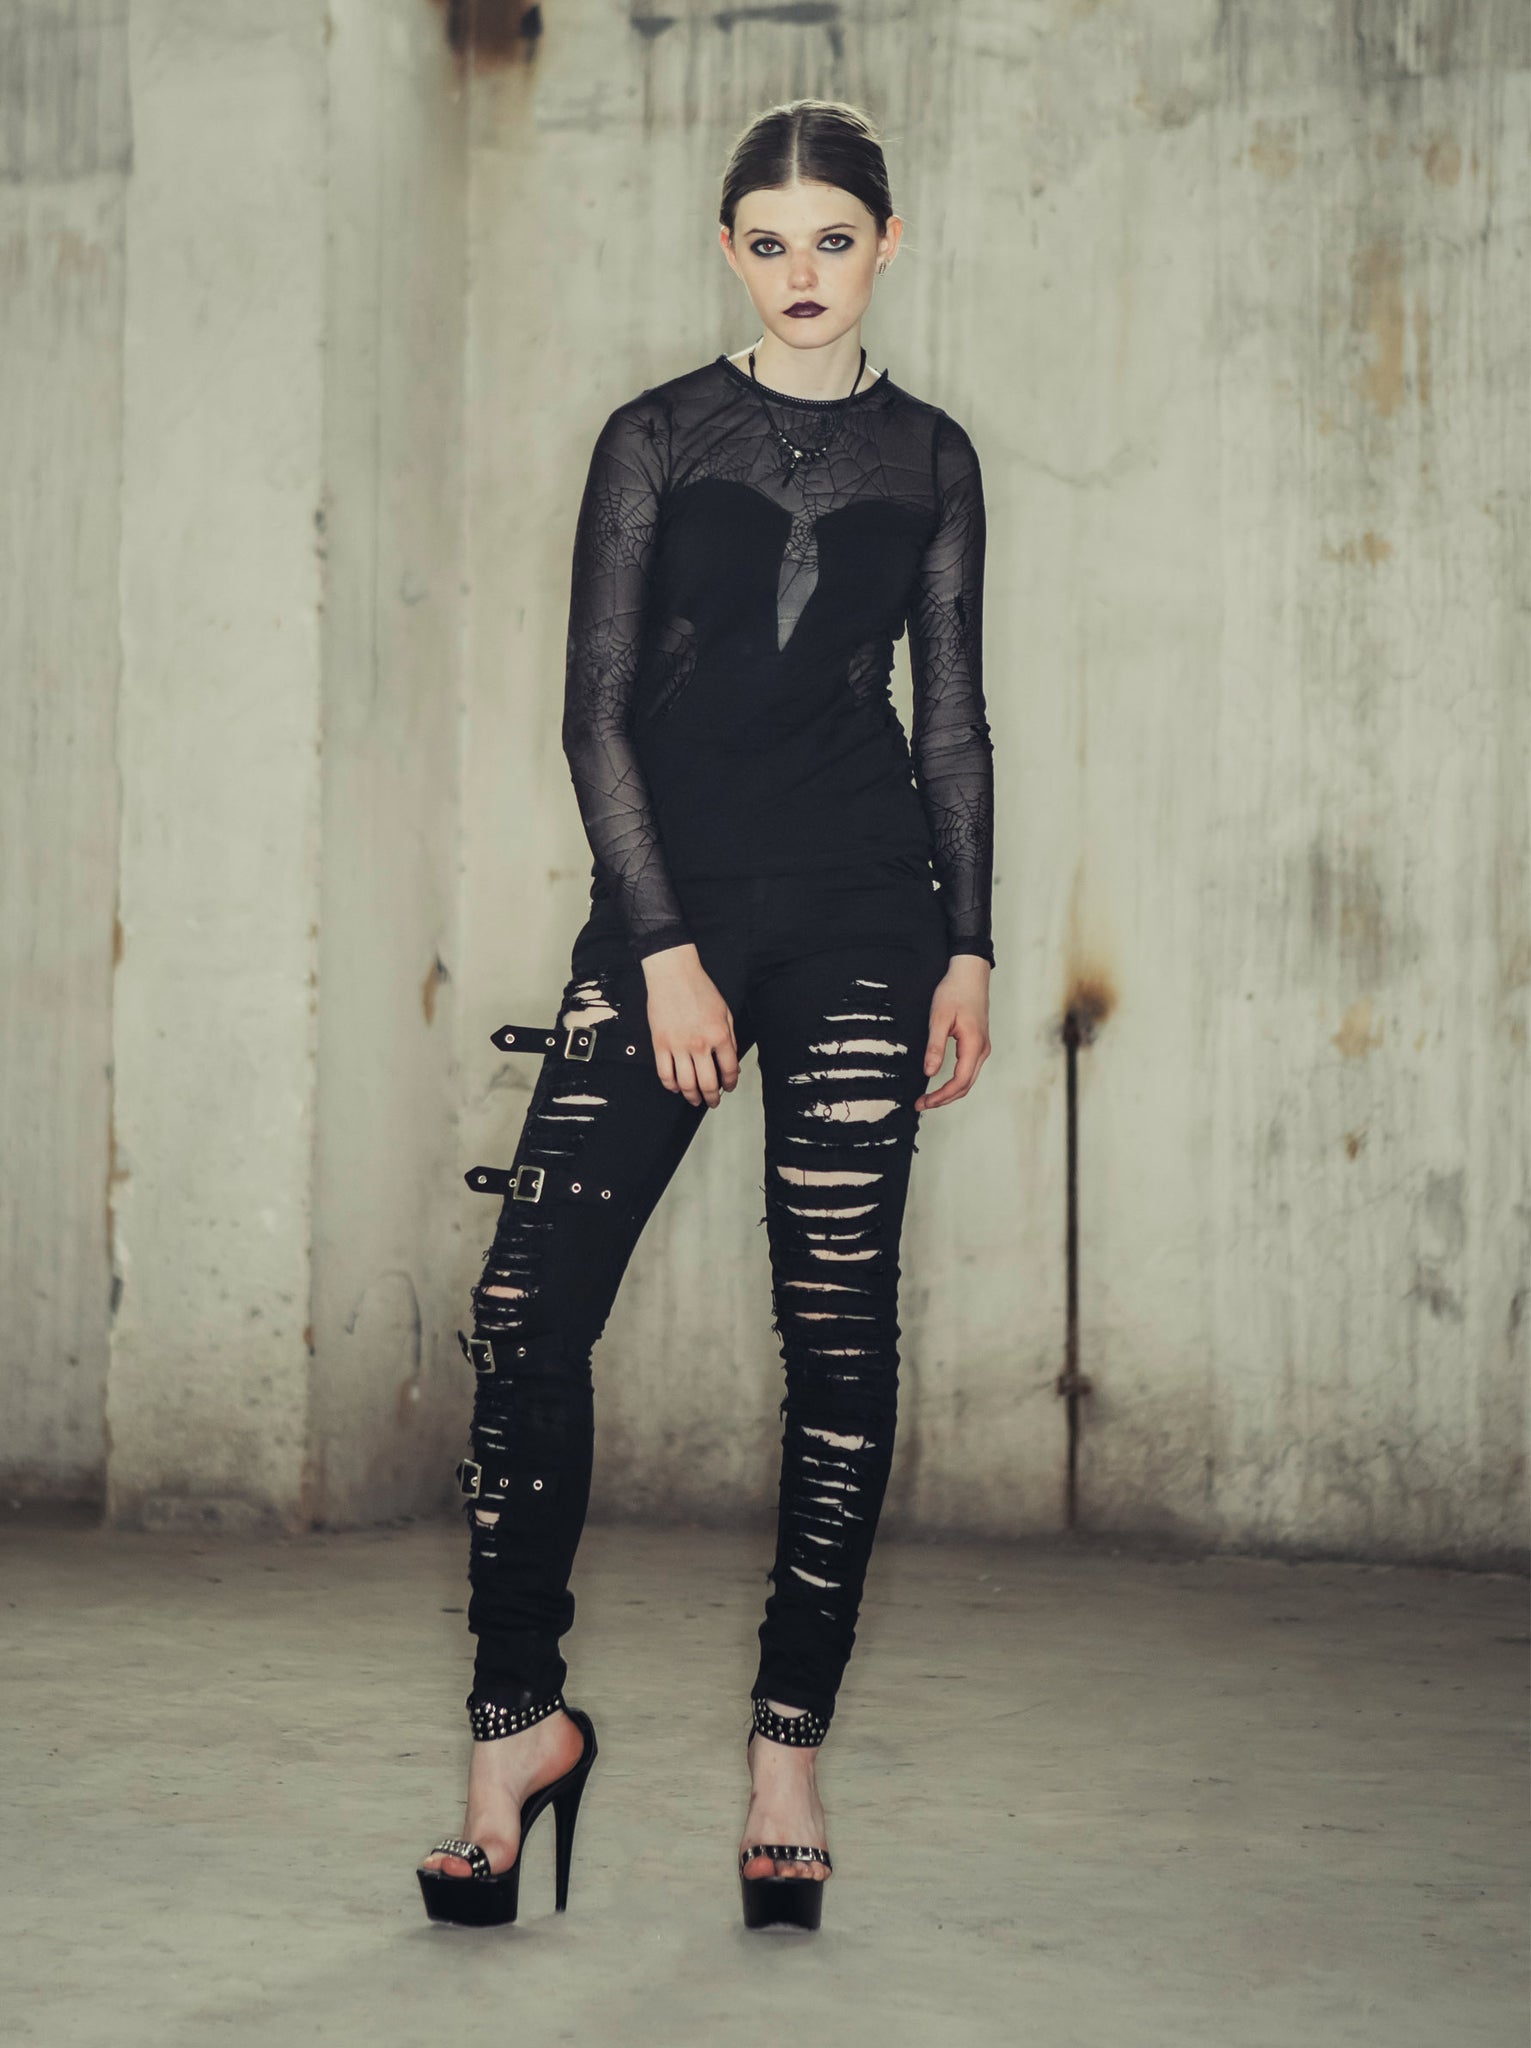 Morrigan Strap and Lacing Black Slim Fit Gothic Trousers by Dark